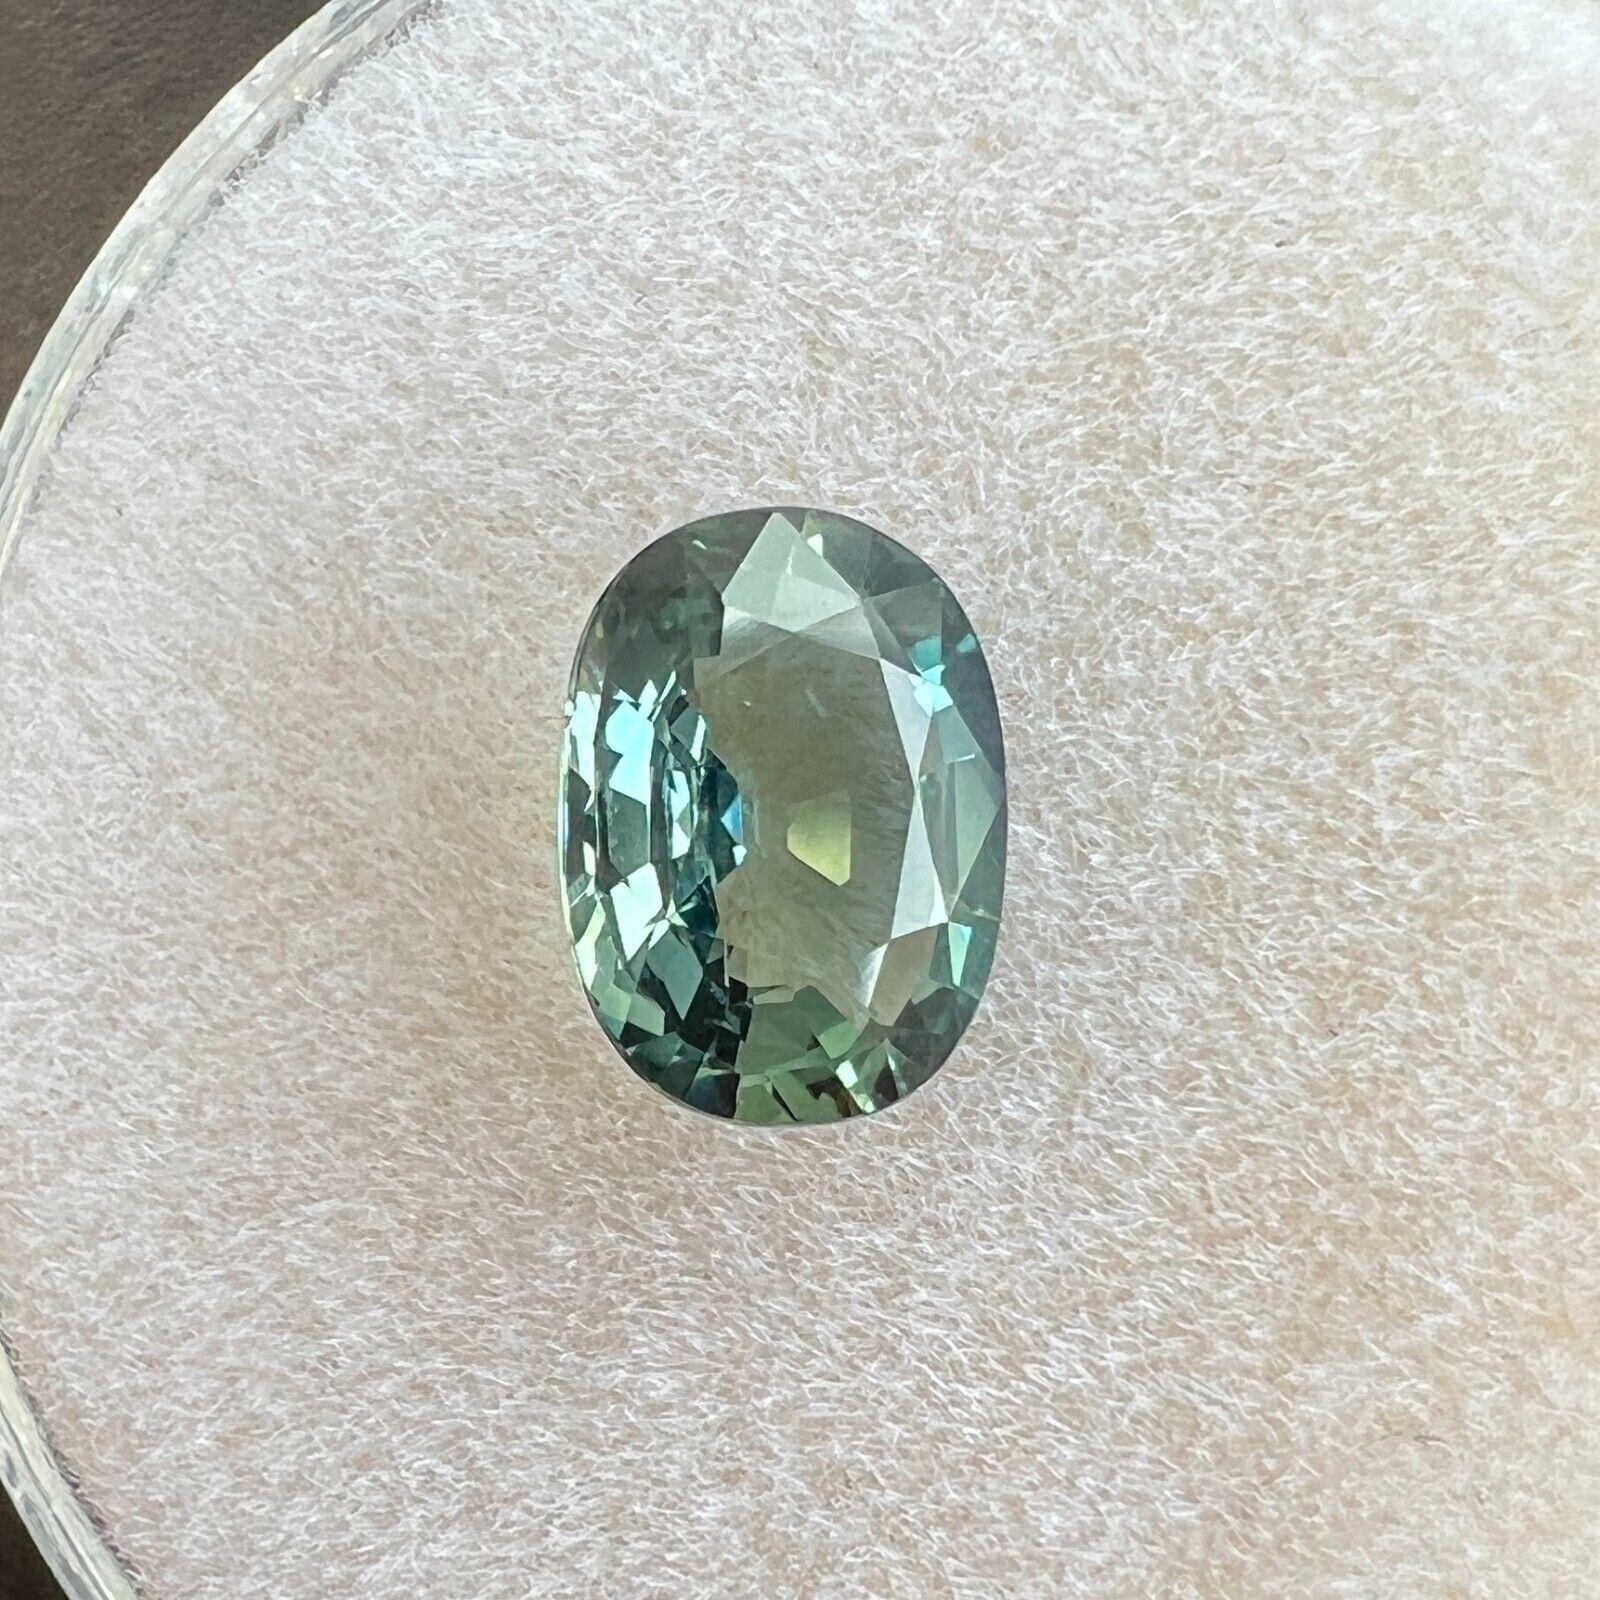 0.93ct Natural Vivid Blue Green Australian Sapphire Oval Cut Gem 6x5.2mm VVS

Natural Australian Blue Green Sapphire Gemstone.
0.93 Carat with a beautiful and unique green blue colour and excellent clarity, a very clean stone. Also has an excellent